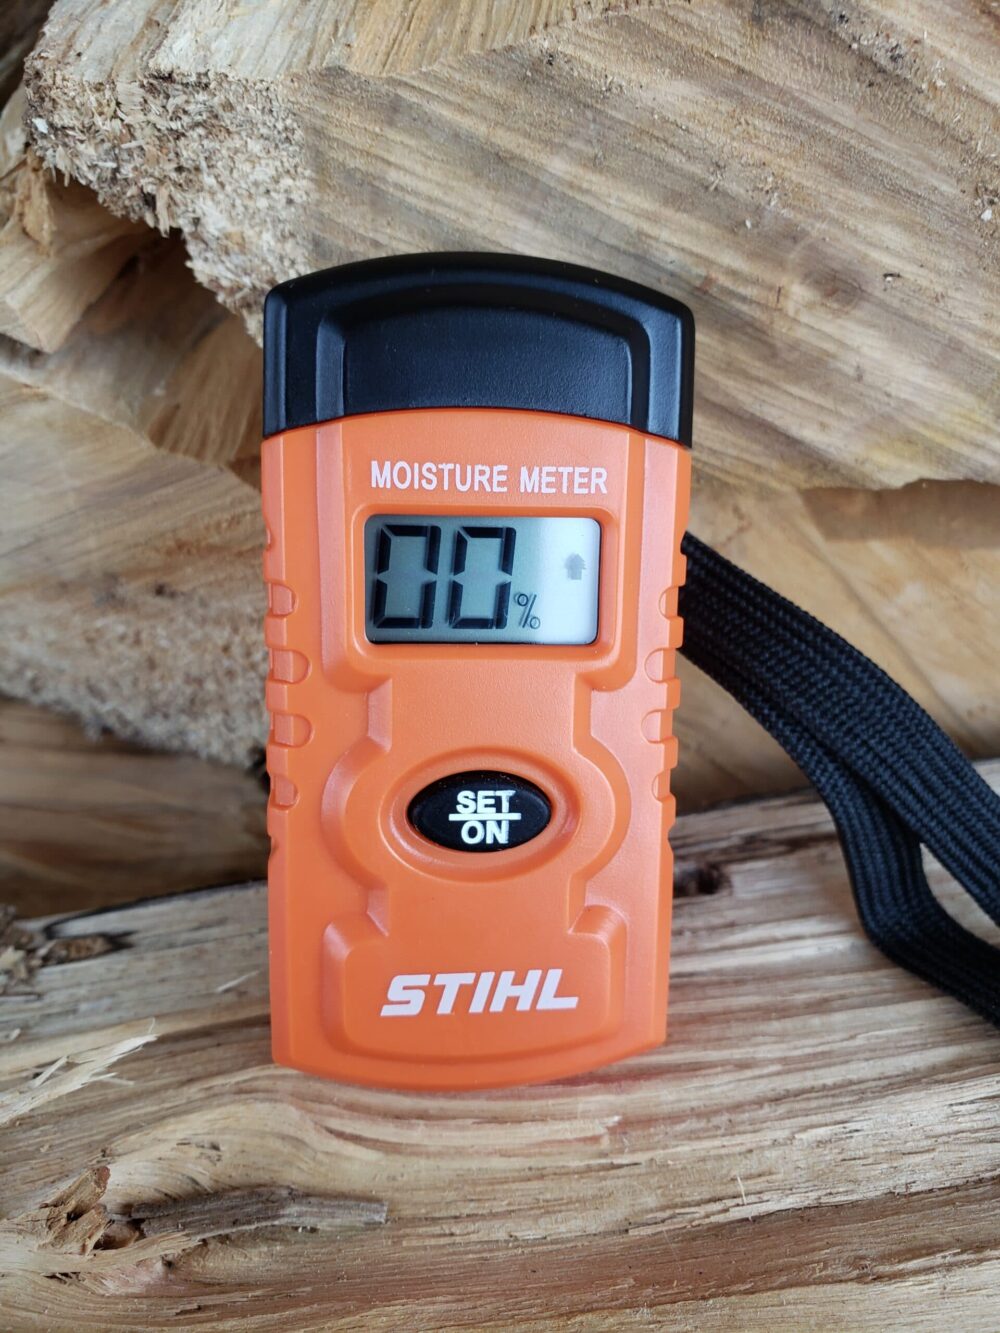 stihl 0464 802 0010 wood moisture meter for firewood humidity measuring device